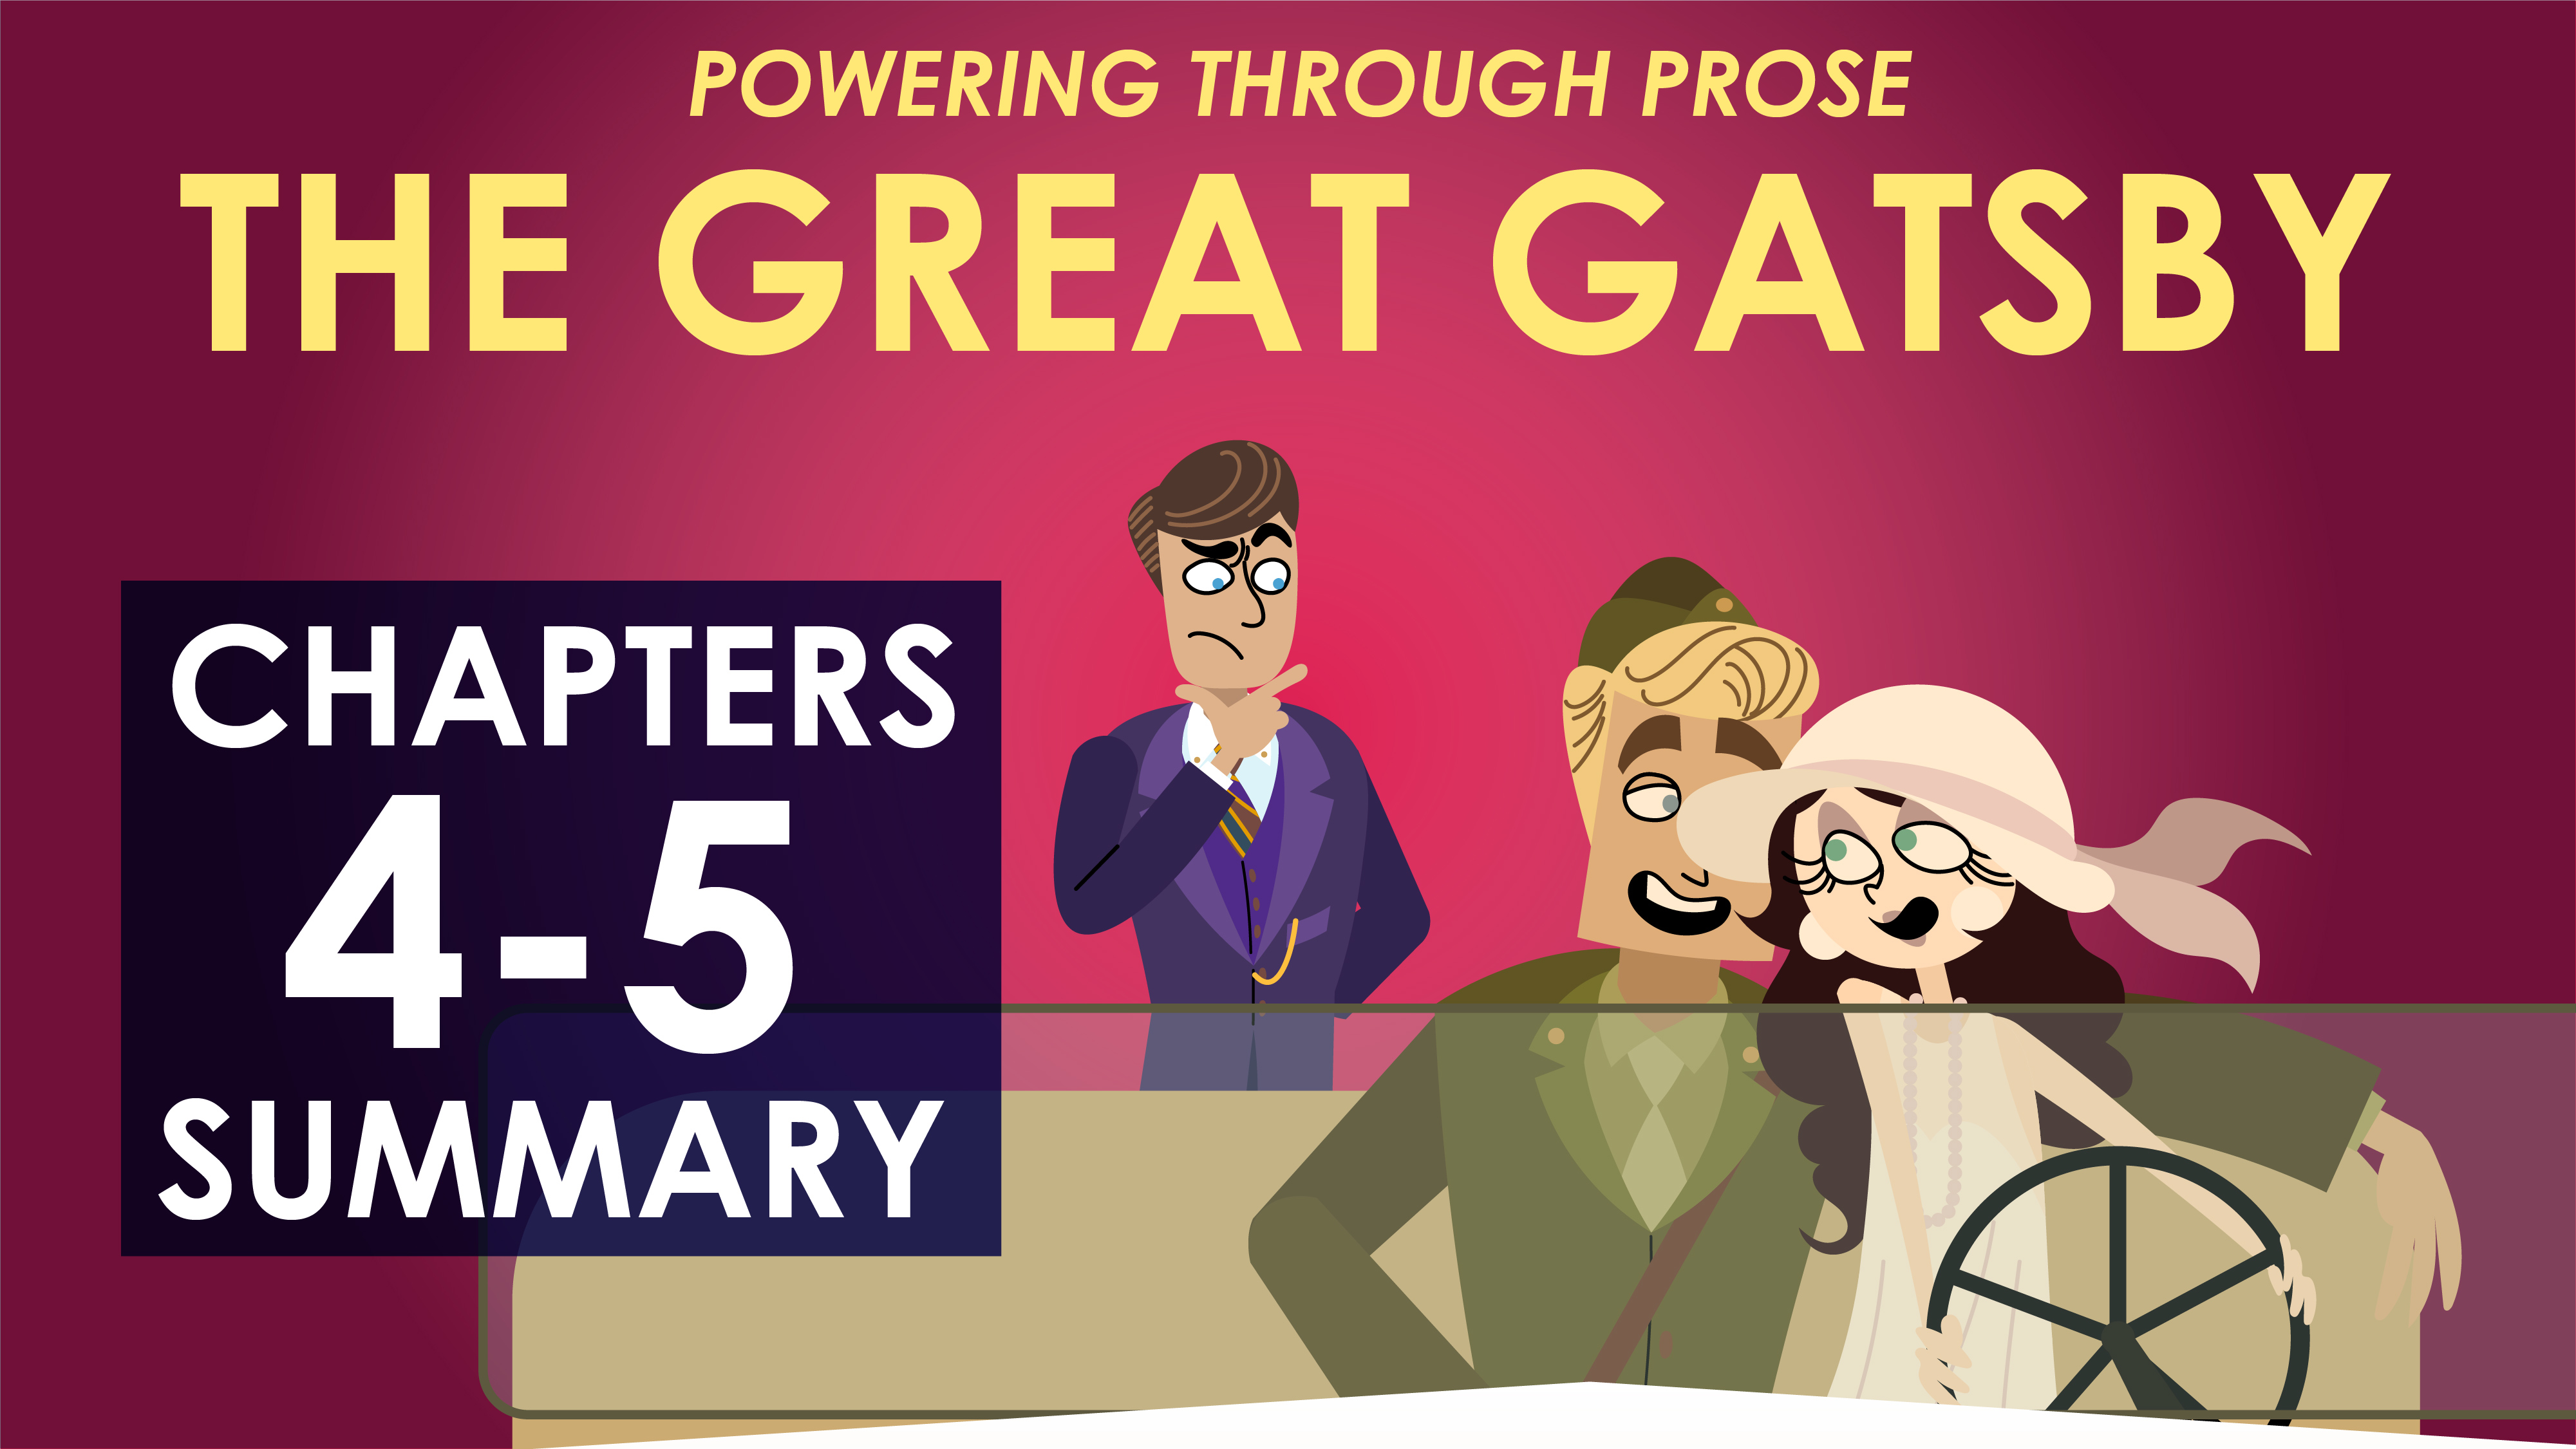 The Great Gatsby - F. Scott Fitzgerald - Chapters 4-5 Summary - Powering Through Prose Series	